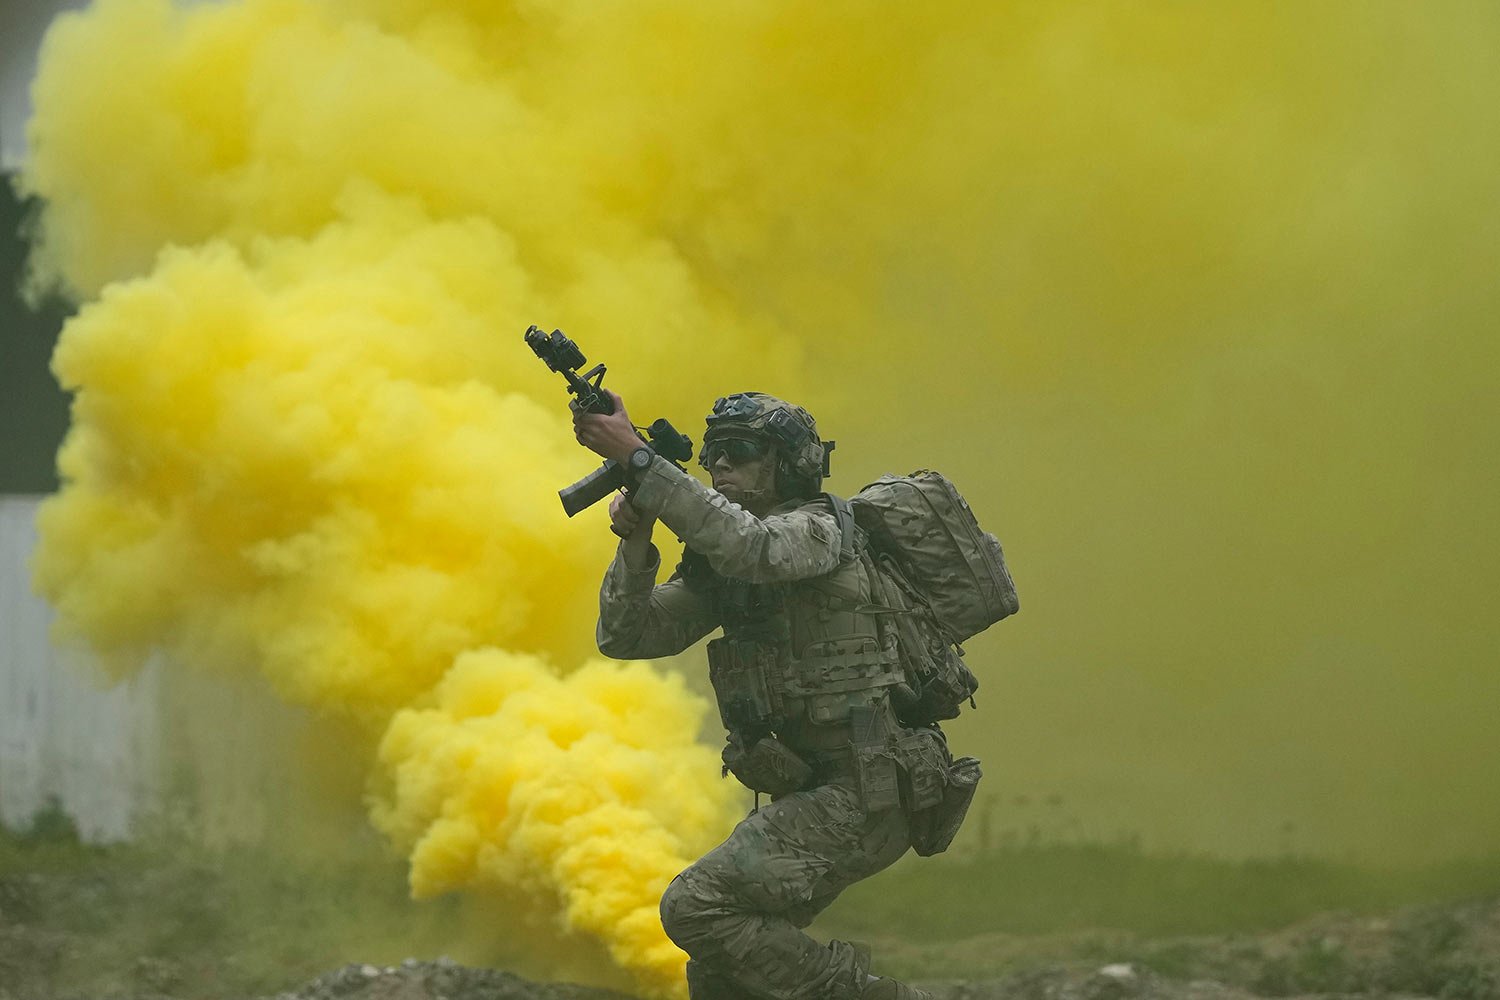  A U.S. soldier from 2nd Stryker Brigade Combat Team, 4th Infantry Division, runs in a smoke during South Korea and the United States combined combat demonstration as a part of the K-ICTC (Korea International Combat Training Competition) in Inje, Sou